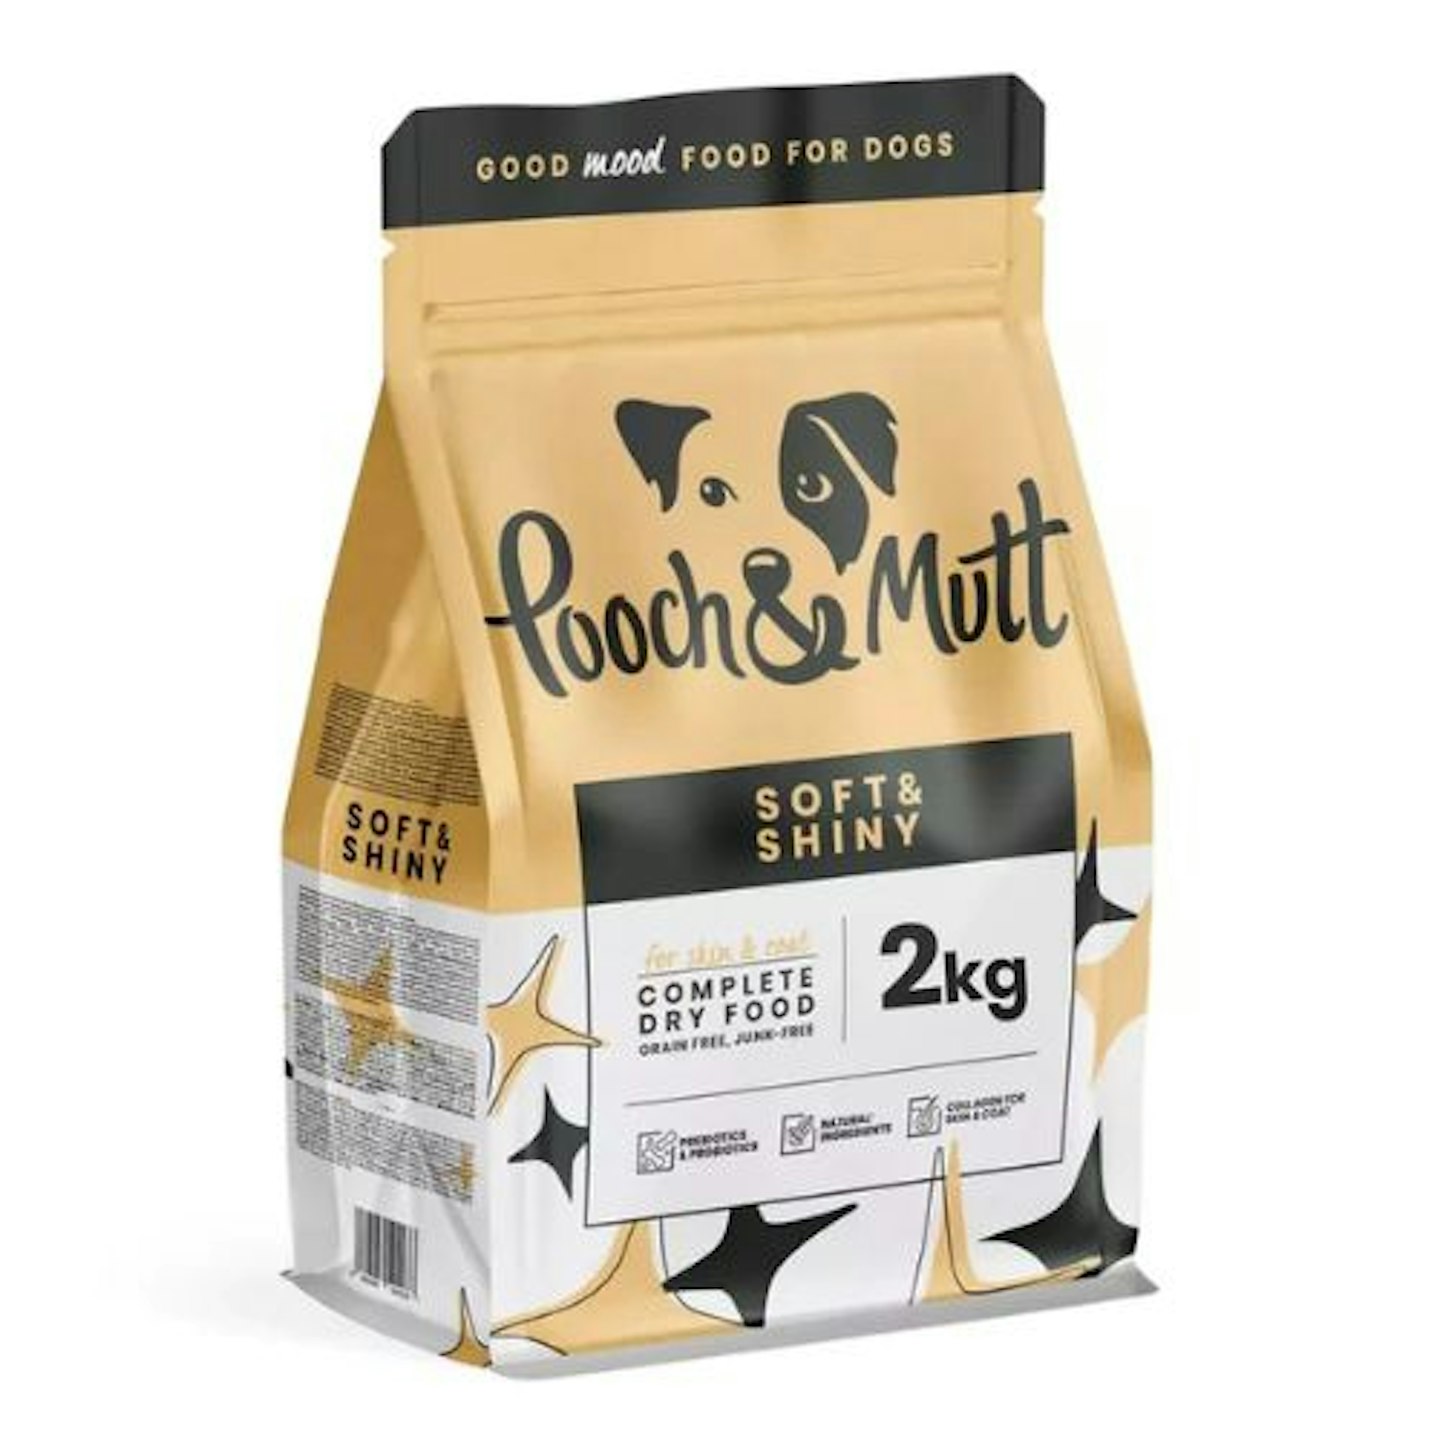 Pooch + Mutt, Soft and Shiny Dry Food - 2kg